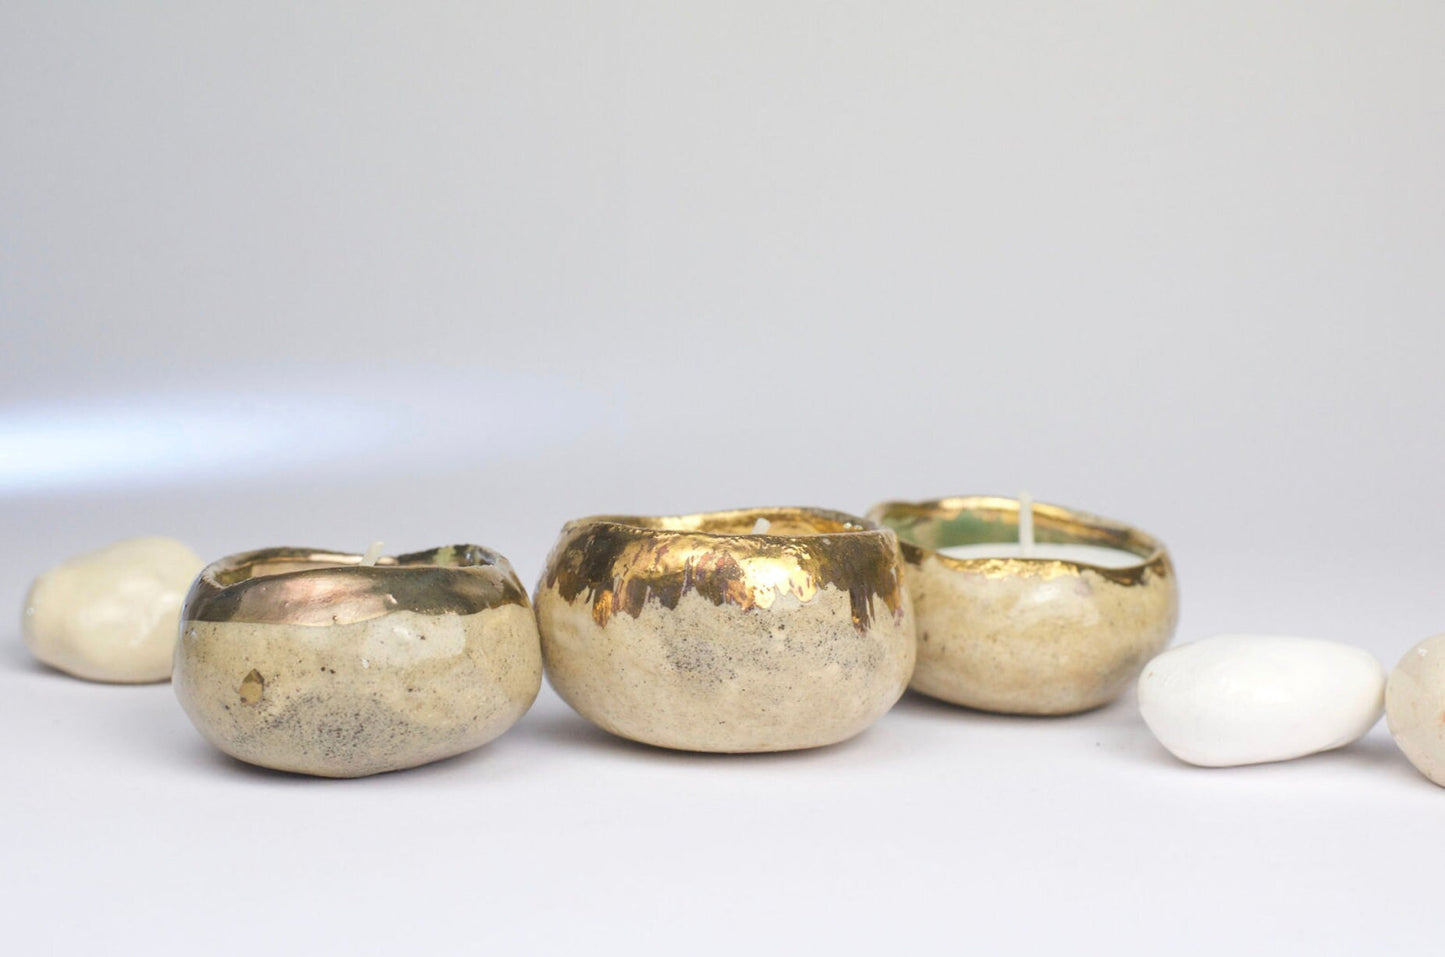 Handmade Ceramic Tea Light Holders | Israel Pottery Made from the Clay of the Holy Land